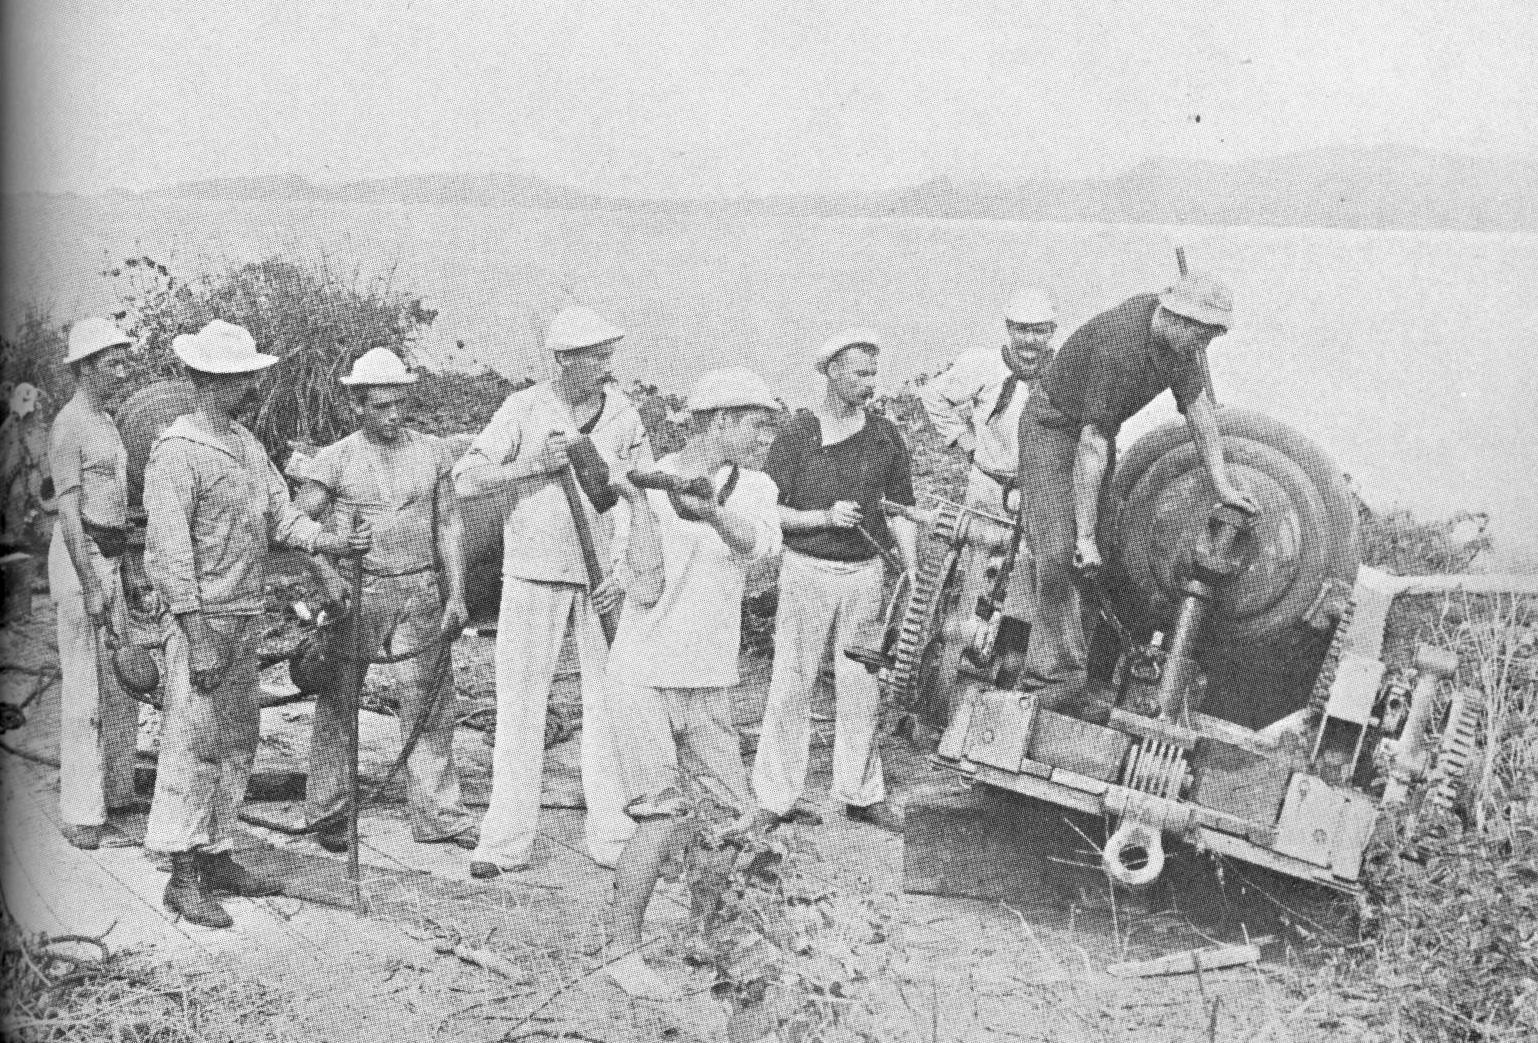 Members of Revenue Cutter McCulloch’s crew pose with a Spanish shore gun disabled during Battle of Manila Bay. (Courtesy of U.S. Navy)